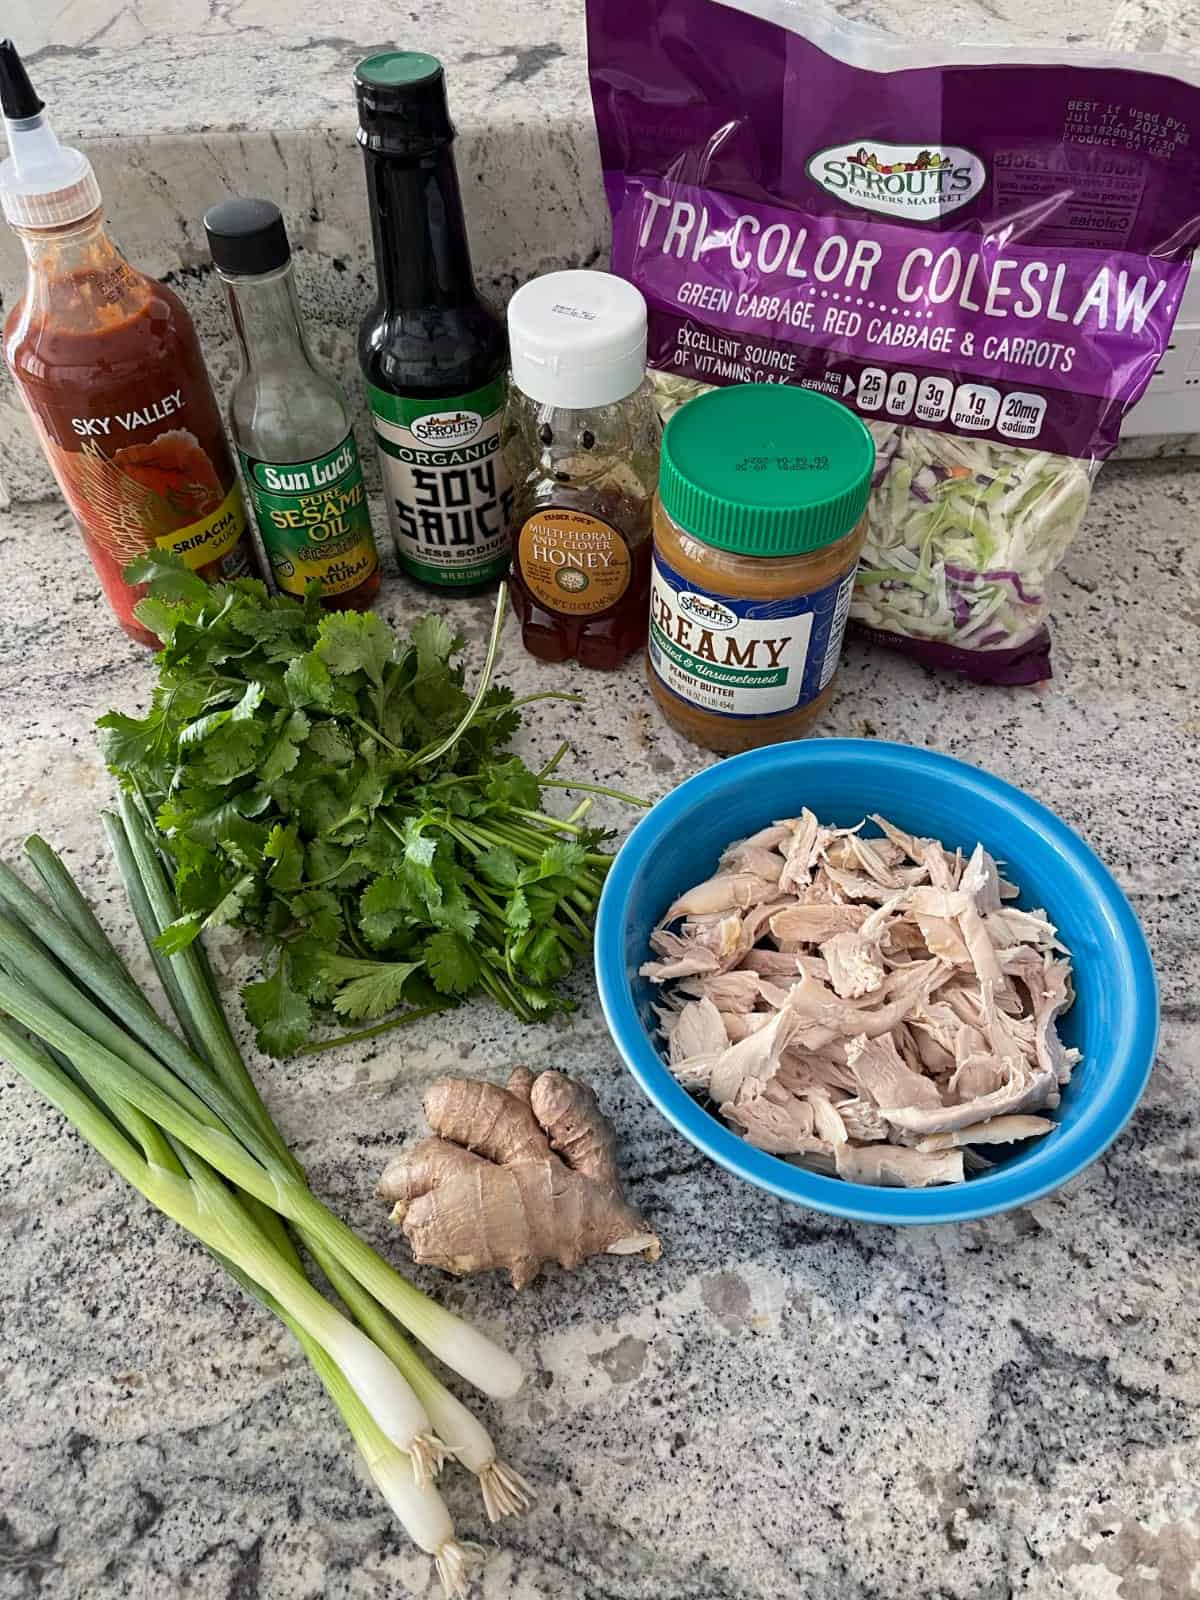 Ingredients including tricolor coleslaw mix, shredded chicken breast, ginger root, green onion, cilantro, peanut butter, honey, low-sodium soy sauce, sesame oil and Sriracha chili sauce on granite counter.